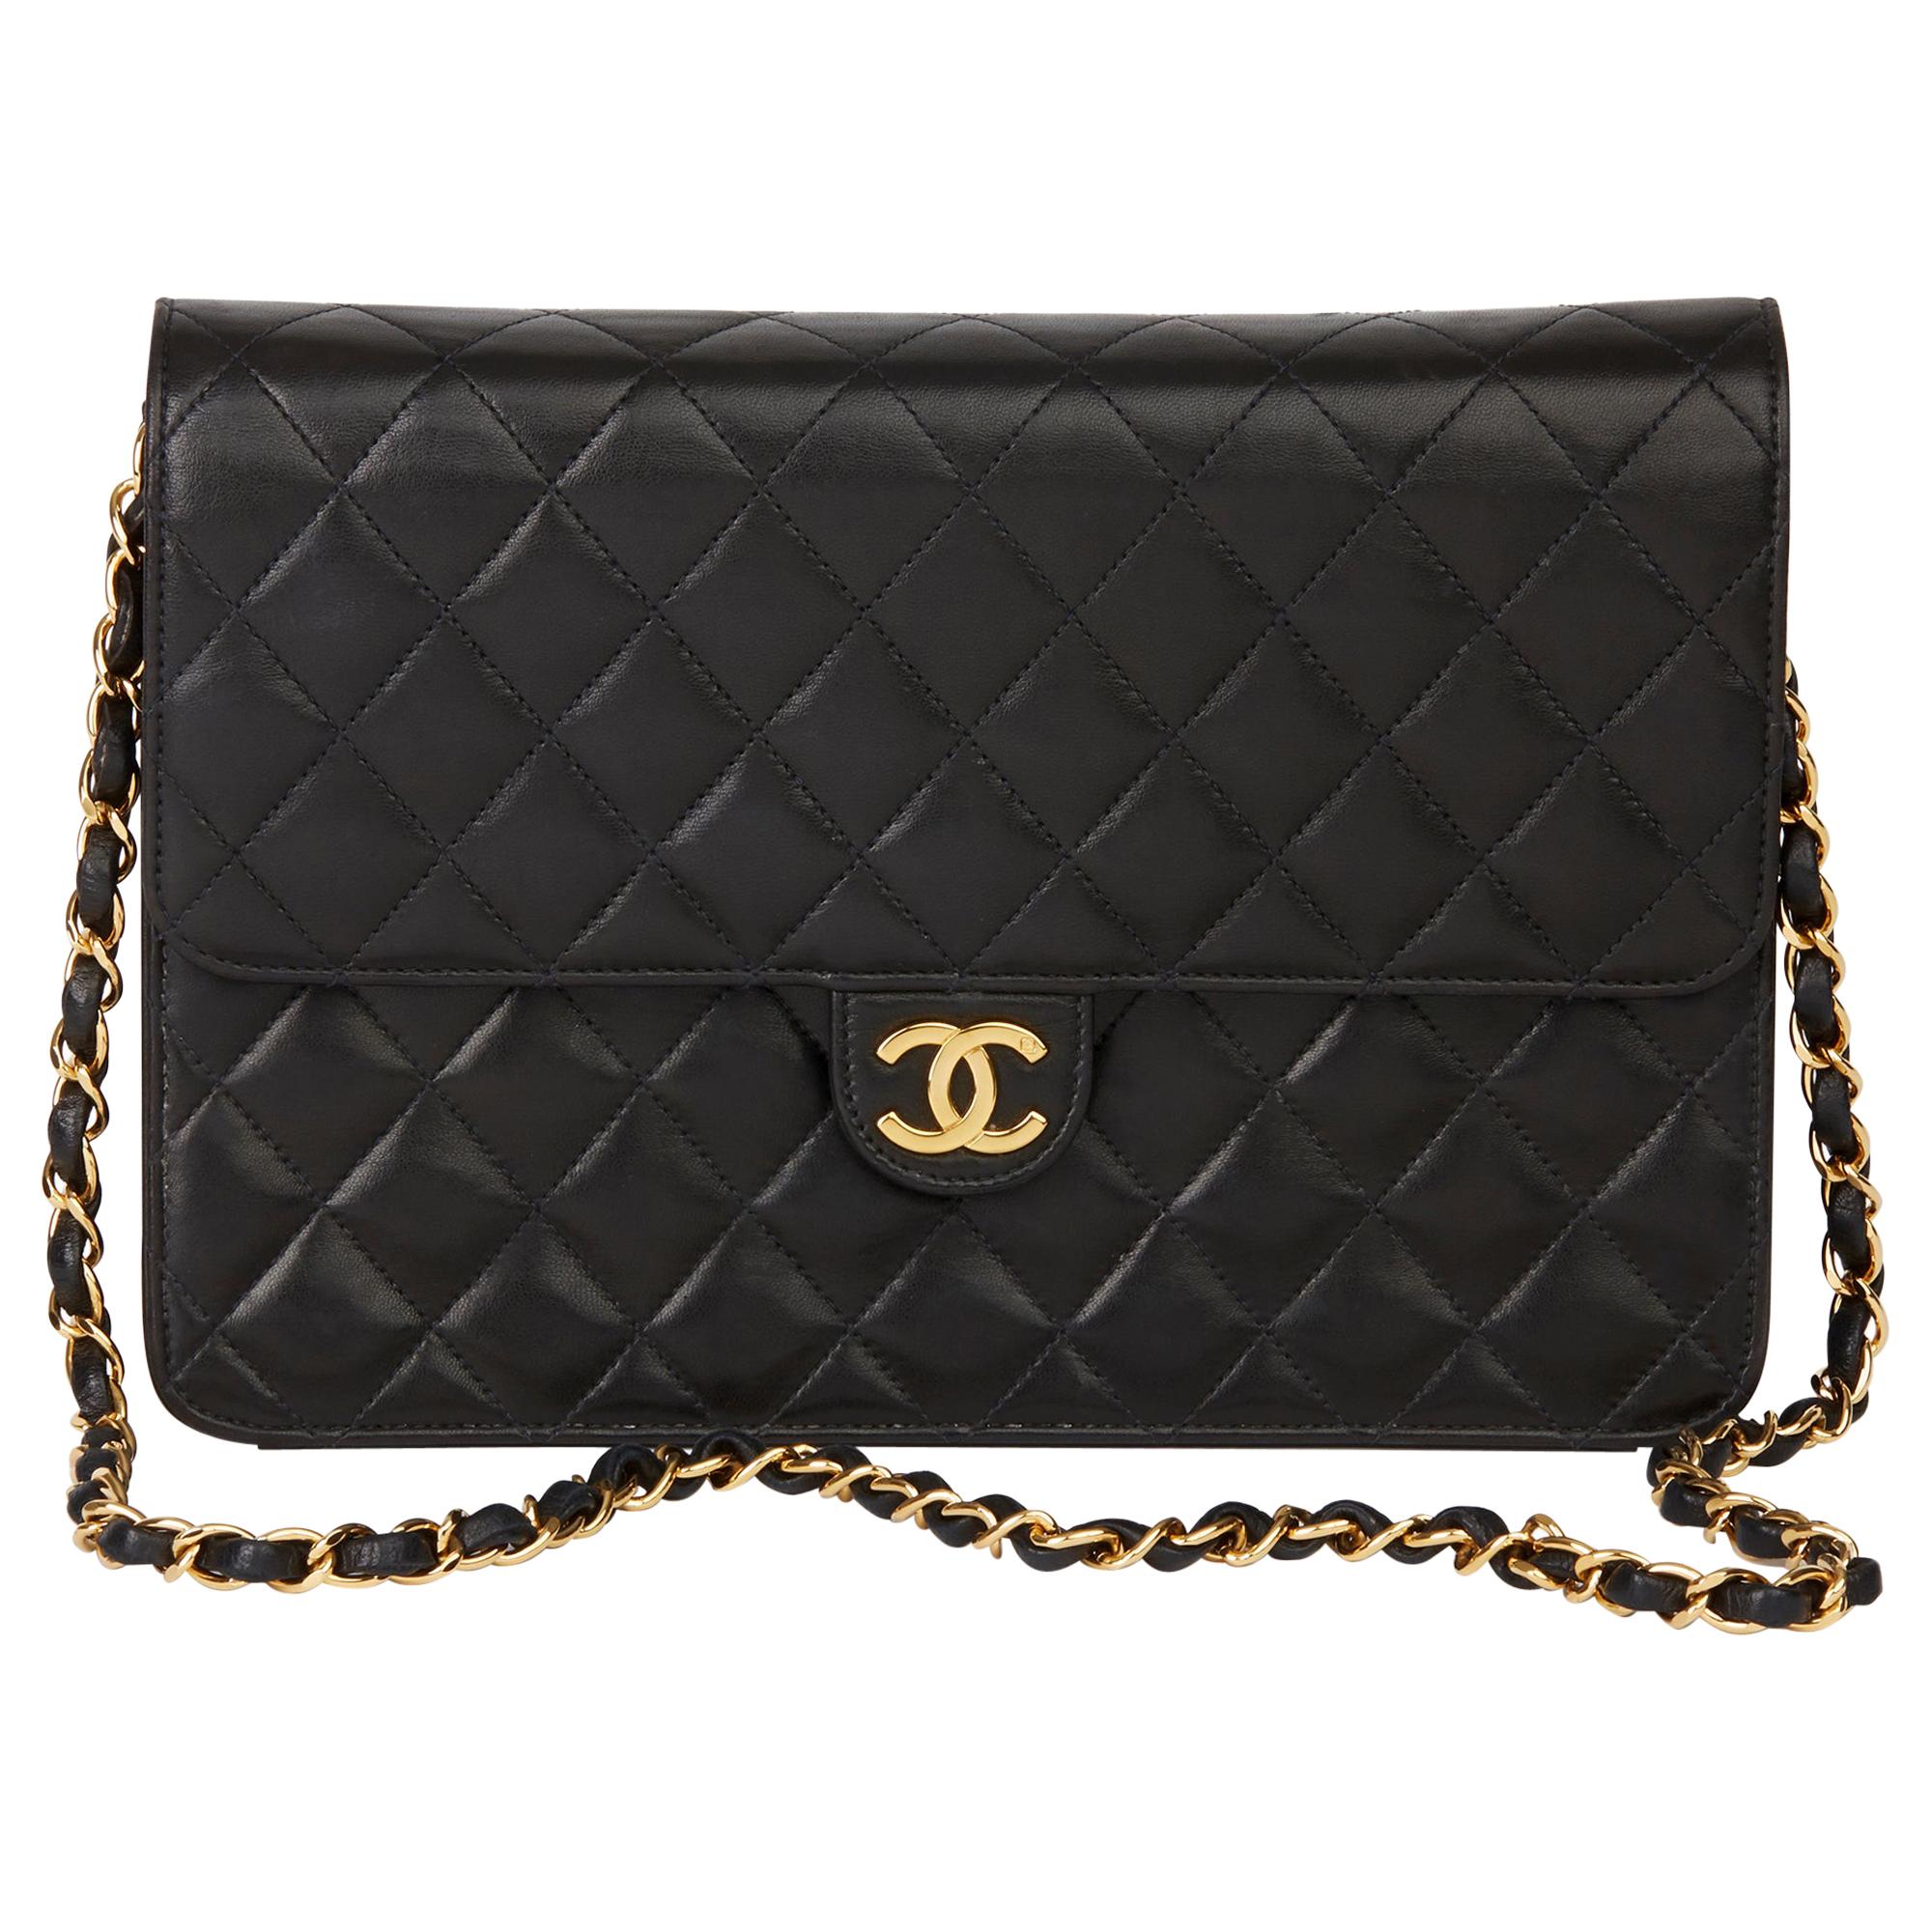 1998 Chanel Black Quilted Lambskin Vintage Small Classic Single